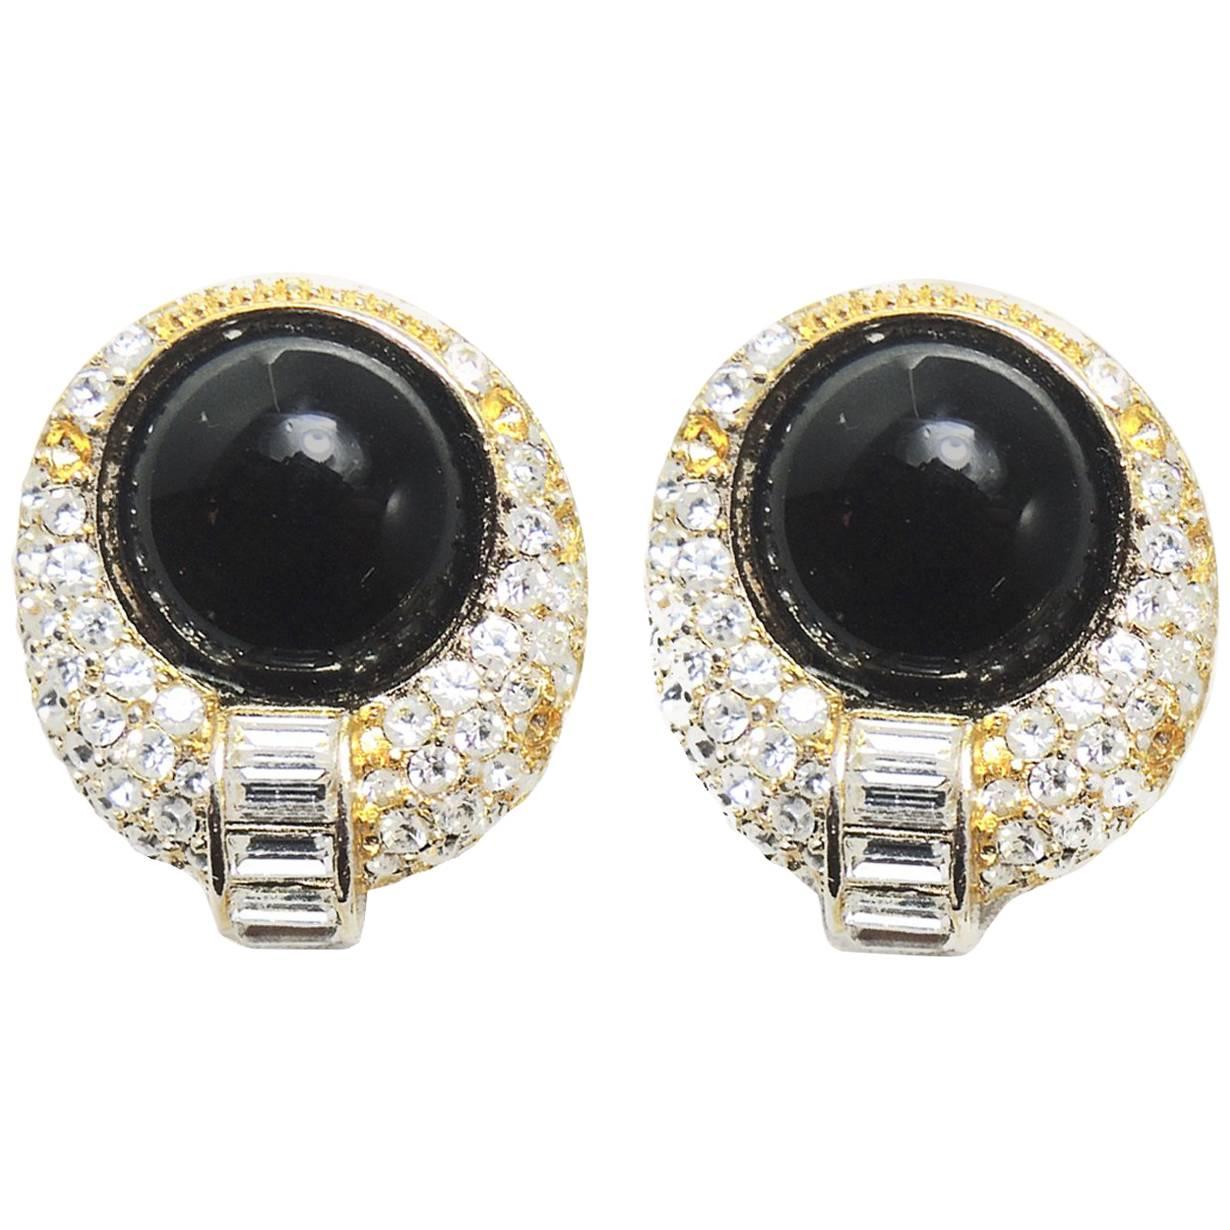 Vintage 1970s Christian Dior Black Glass and Crystal Clip Earrings